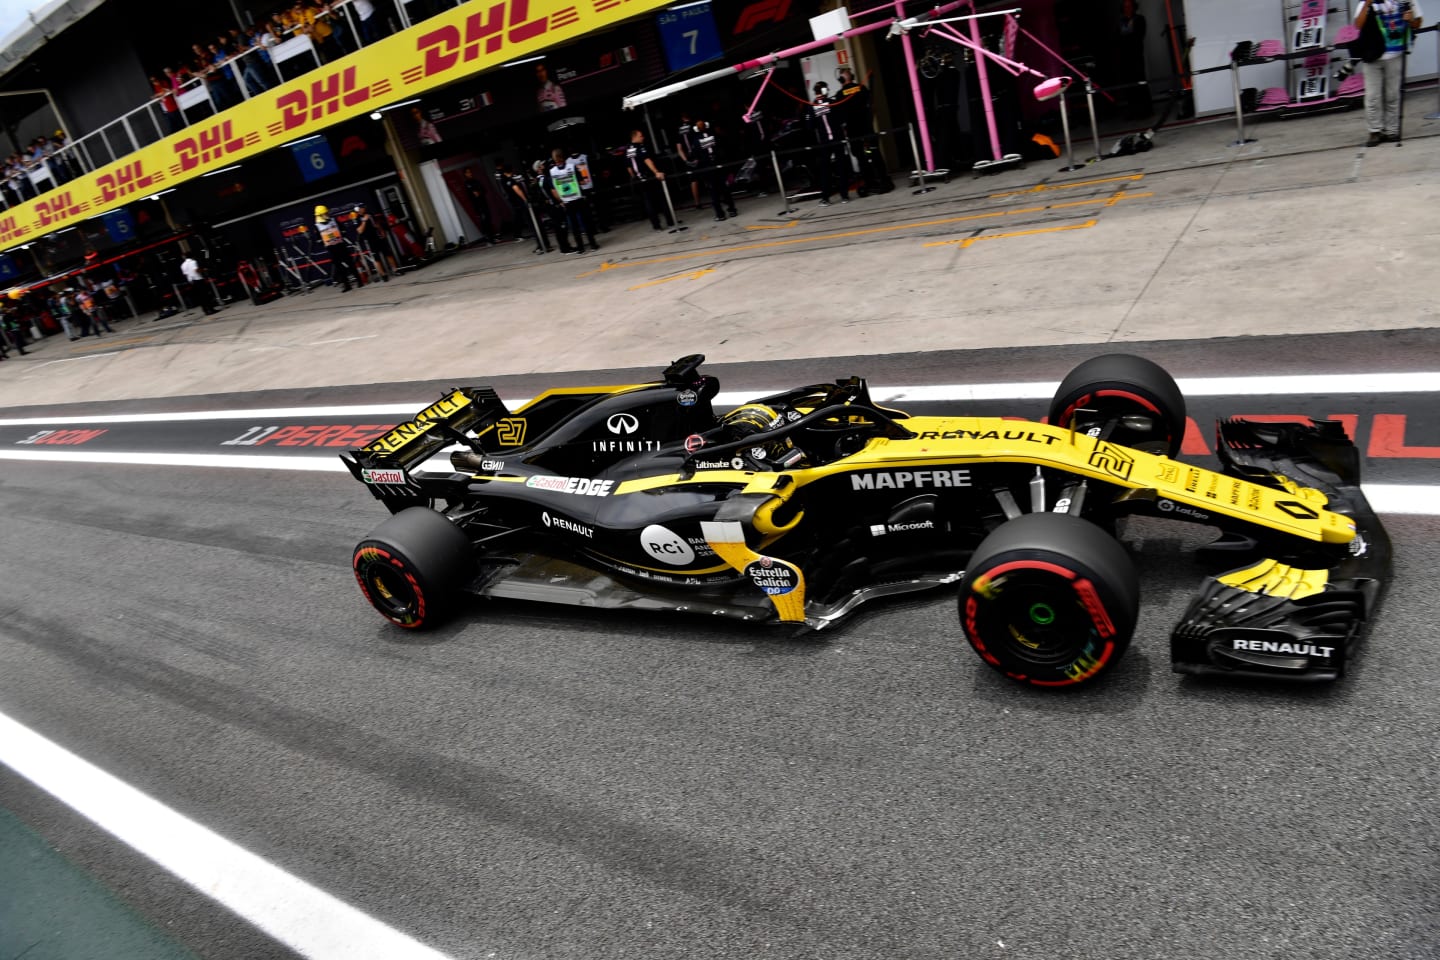 The bulkier ancillaries of the Renault power unit meant it couldn't be packaged as tightly as the Haas